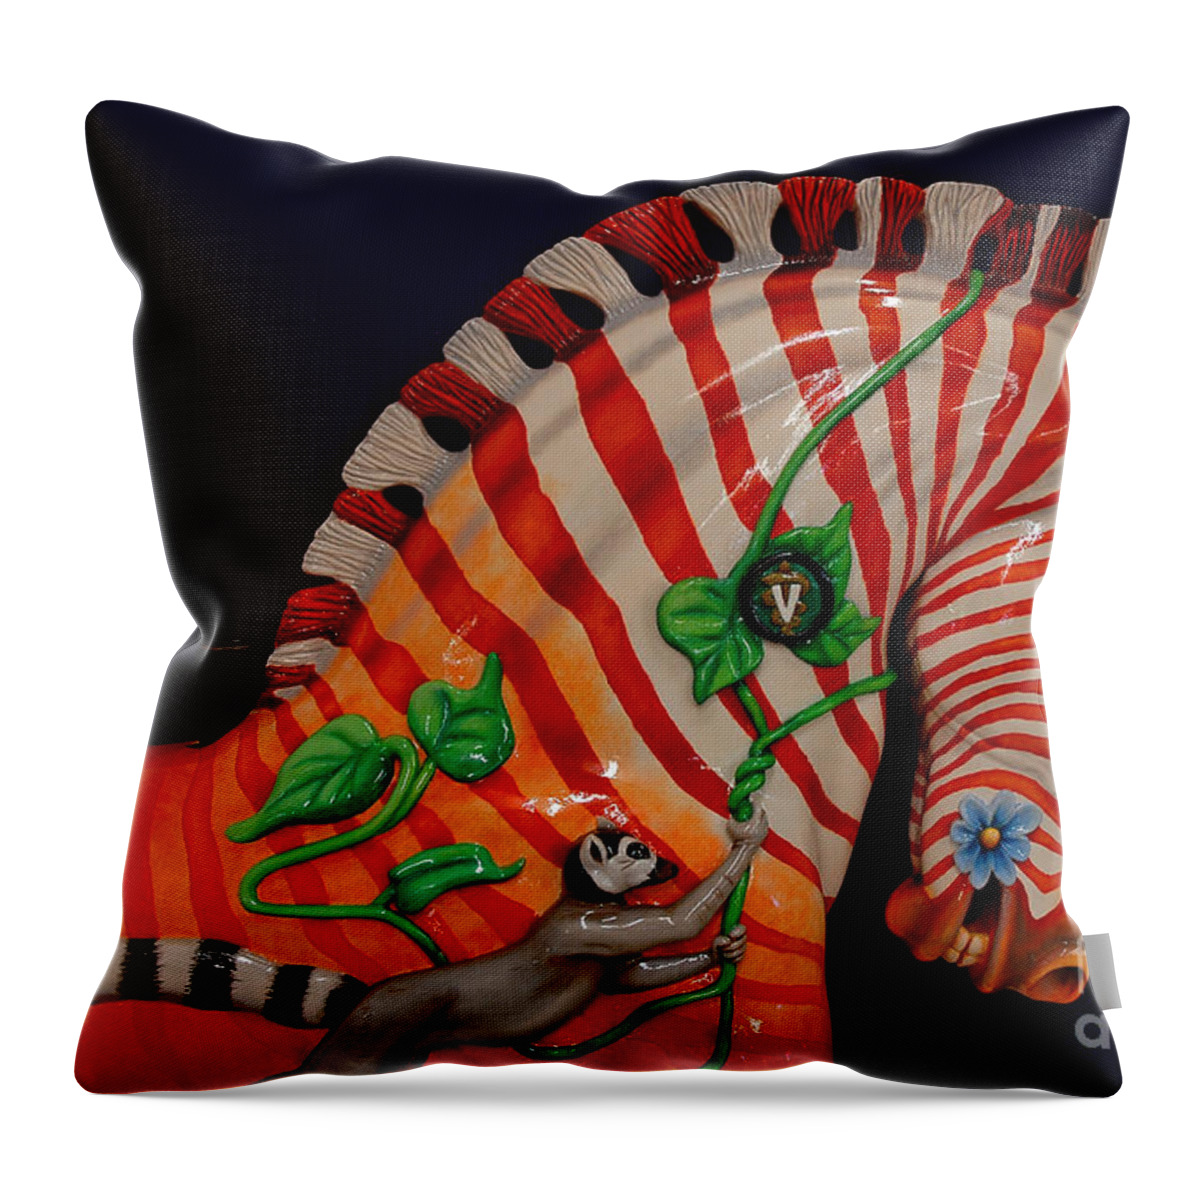 Pacific Throw Pillow featuring the photograph Albany Oregon Historic Carousel by Nick Boren